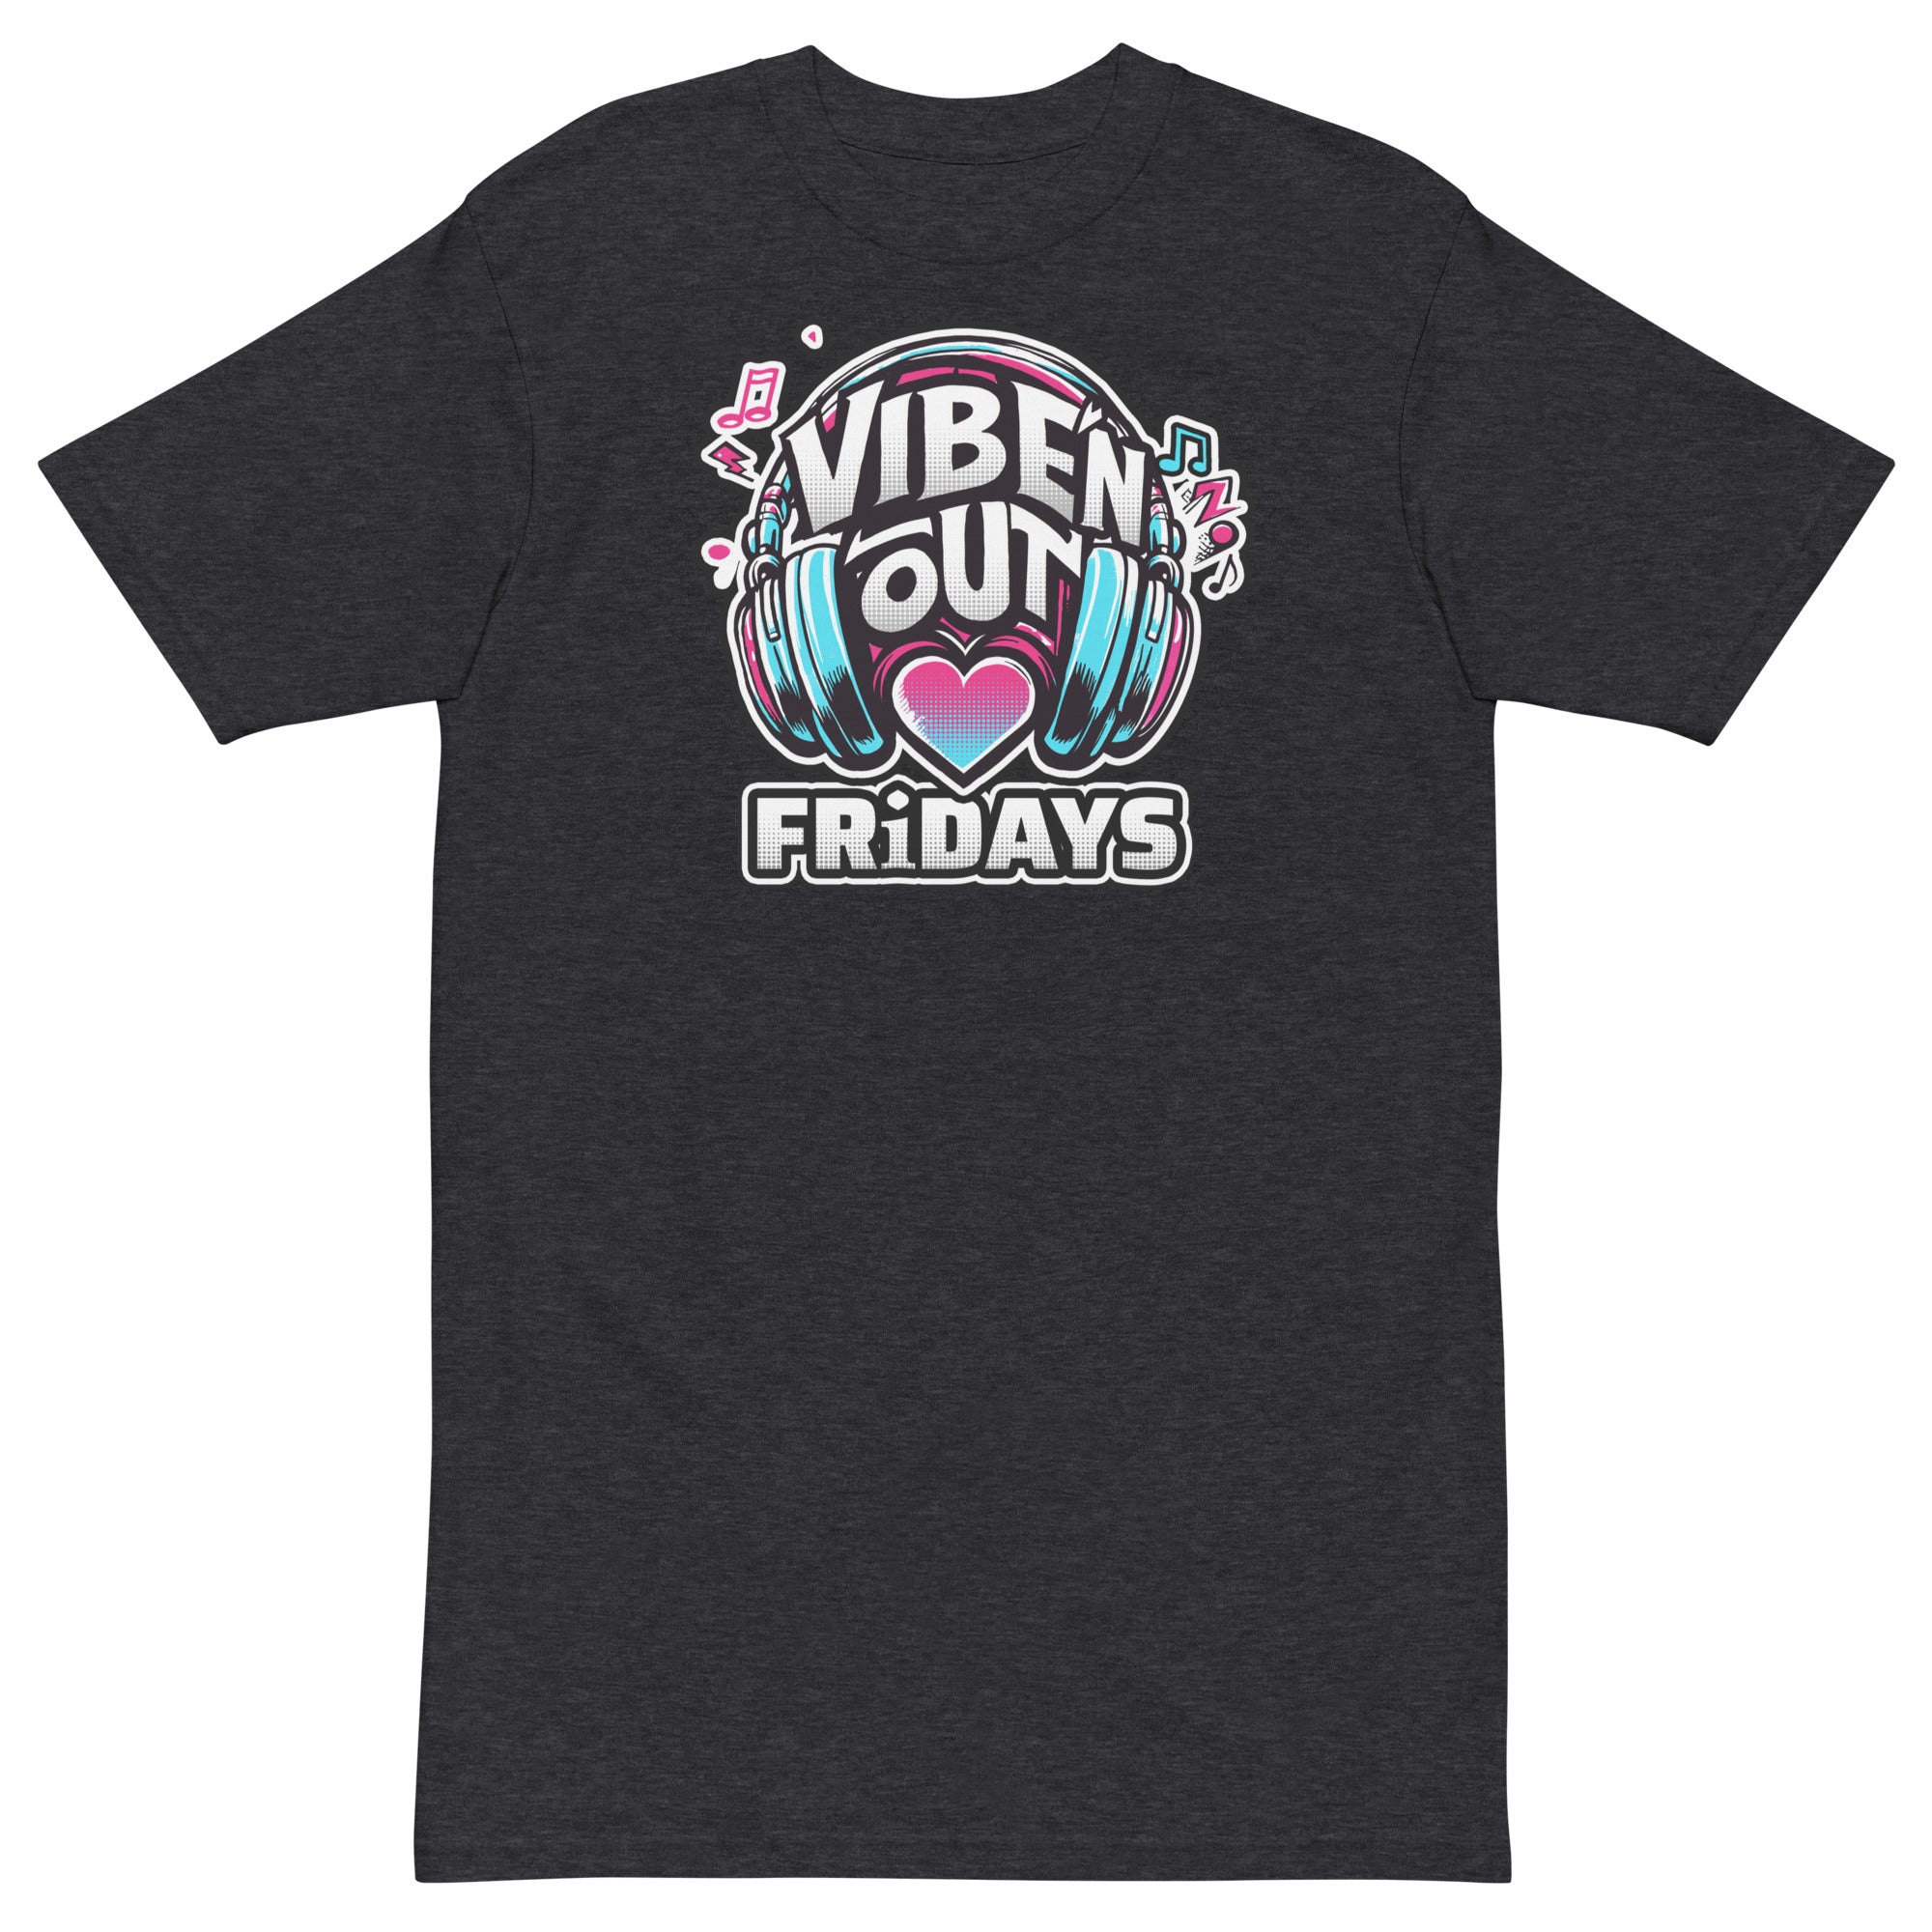 VIBE 'N OUT Friday Premium Unisex T-Shirt